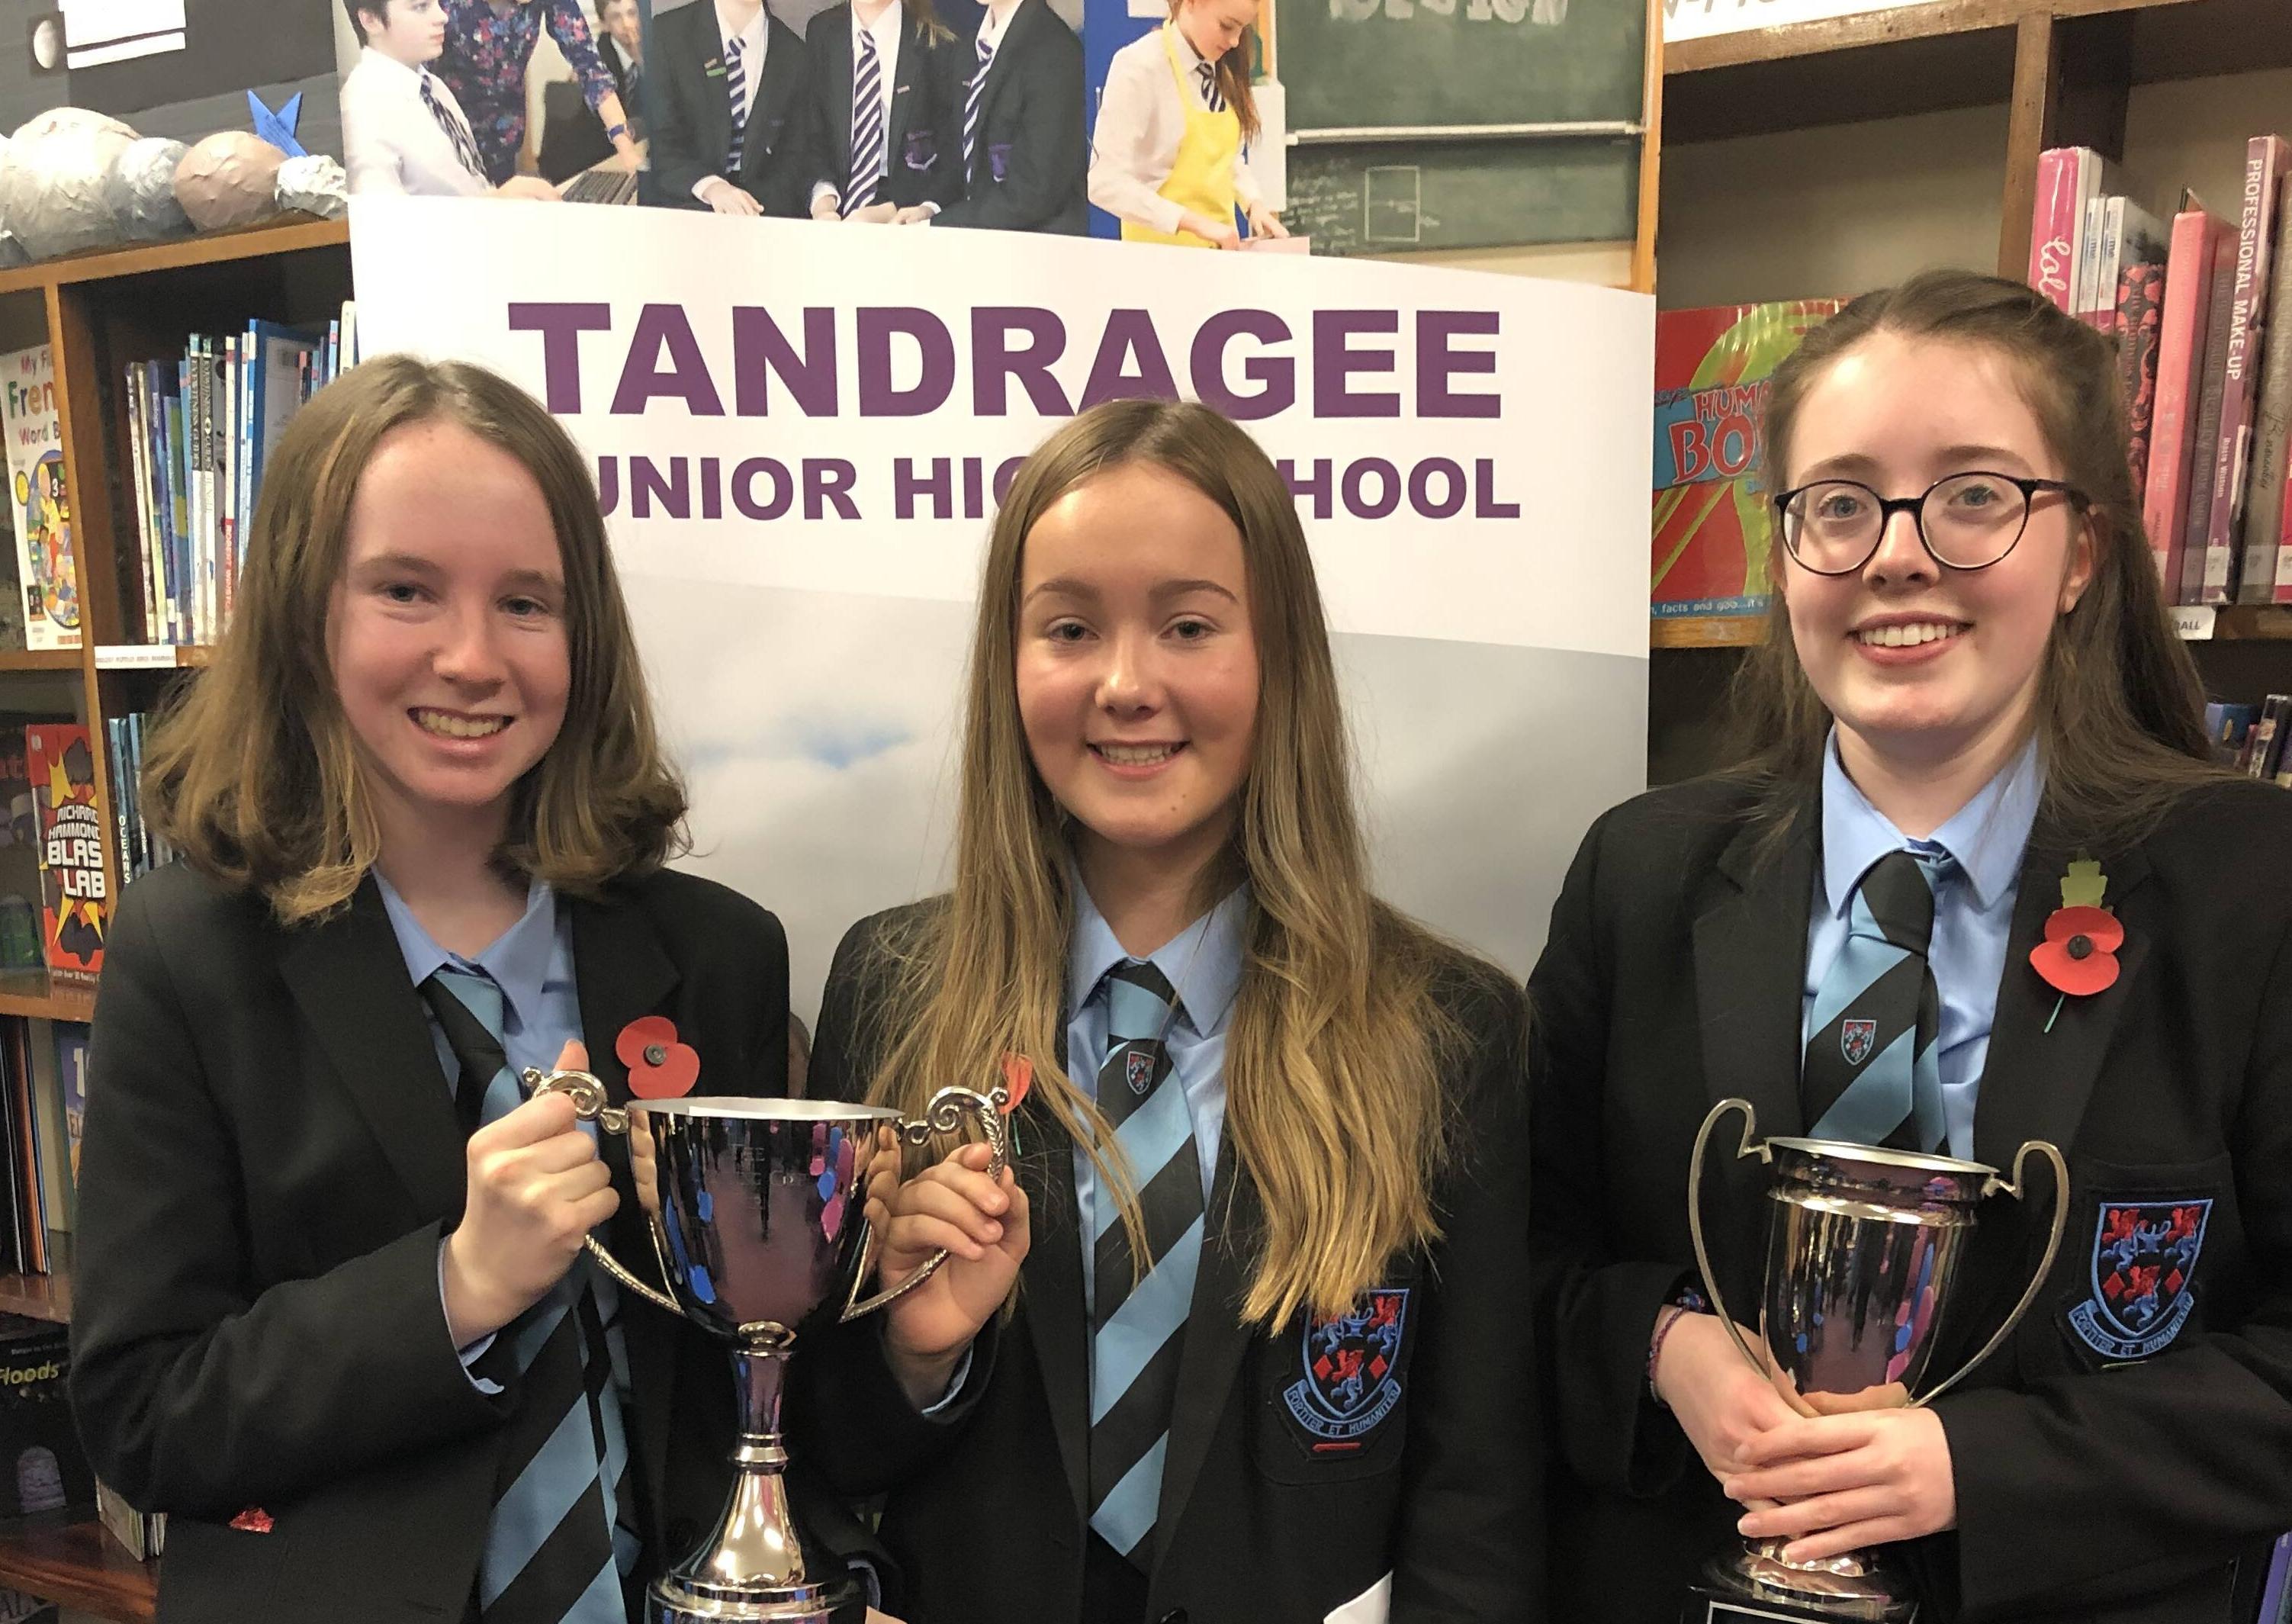 Kaitlin Rock and Ella Duke who shared the Canning Cup for Endeavor in Science pictured along with Jesse Best who won the Dr C Todd Cup for Sciences at the Tandragee Junior High School prize night